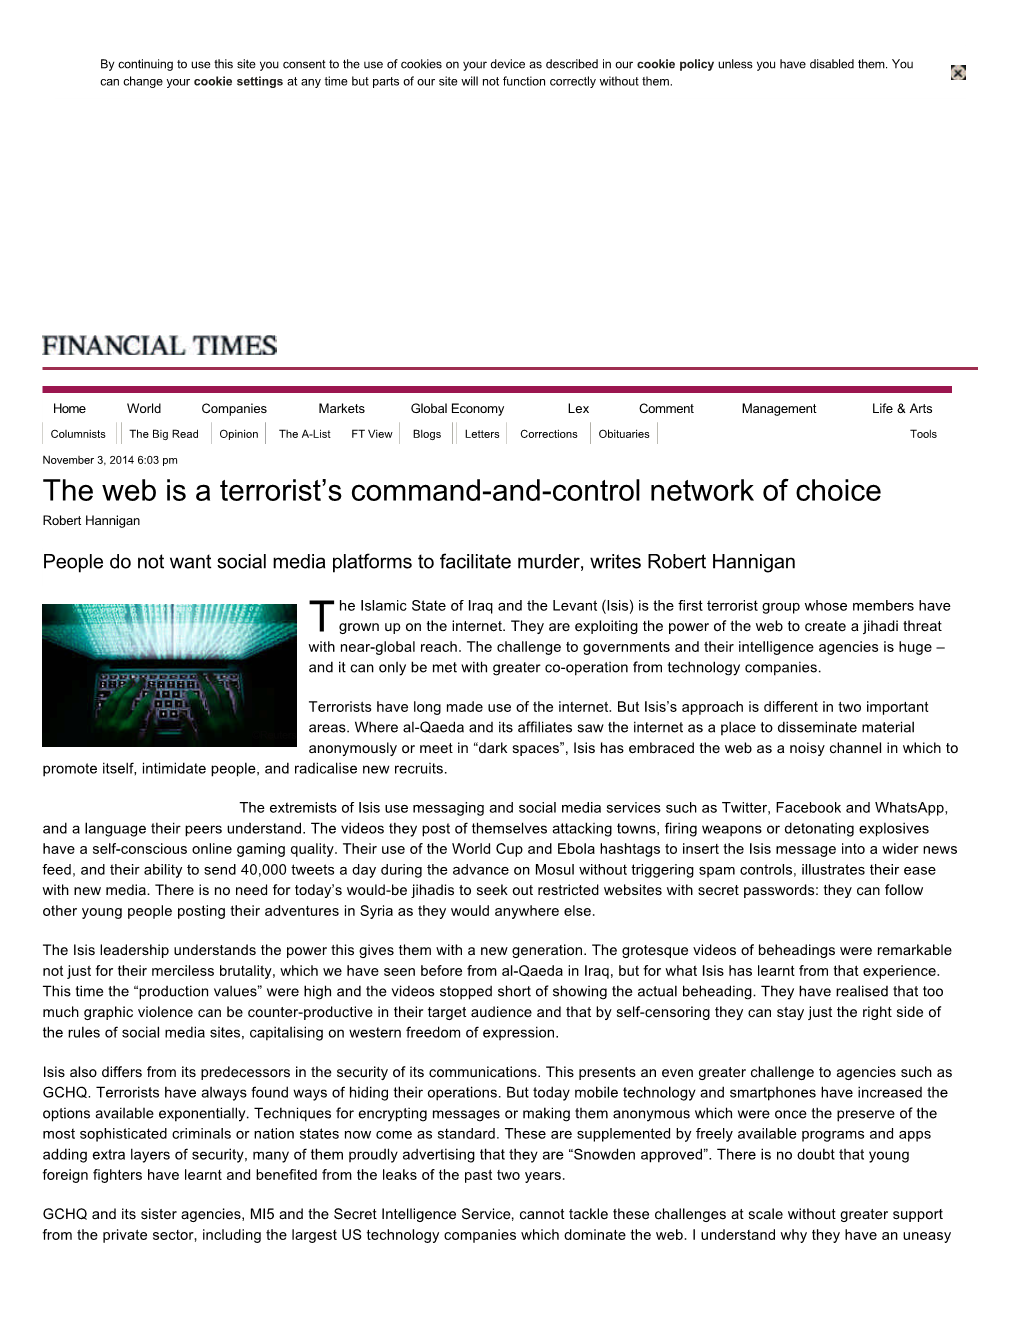 The Web Is a Terrorist's Command-And-Control Network Of